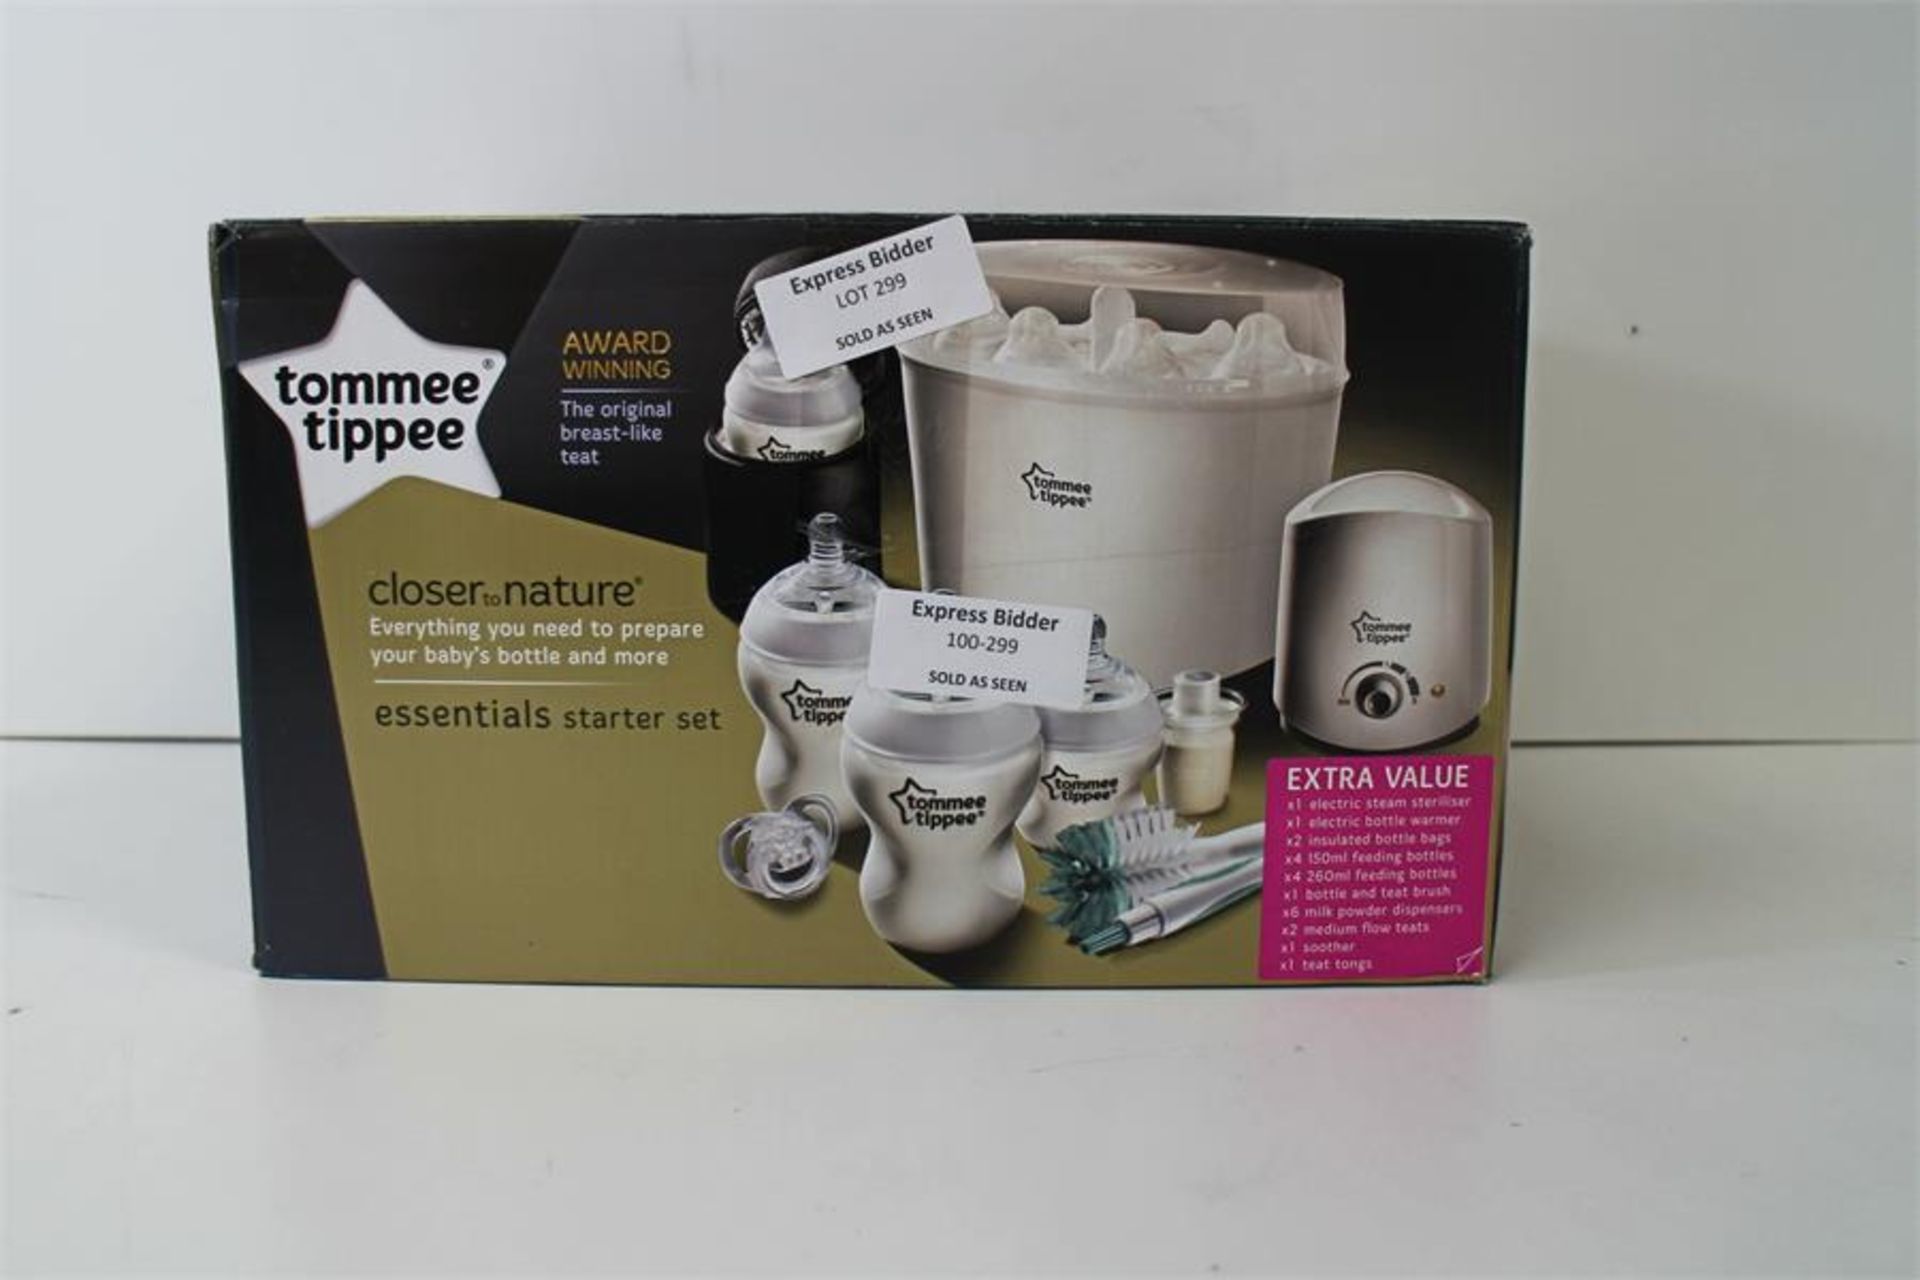 Tommee Tippee Closer to Nature Essentials Starter Kit